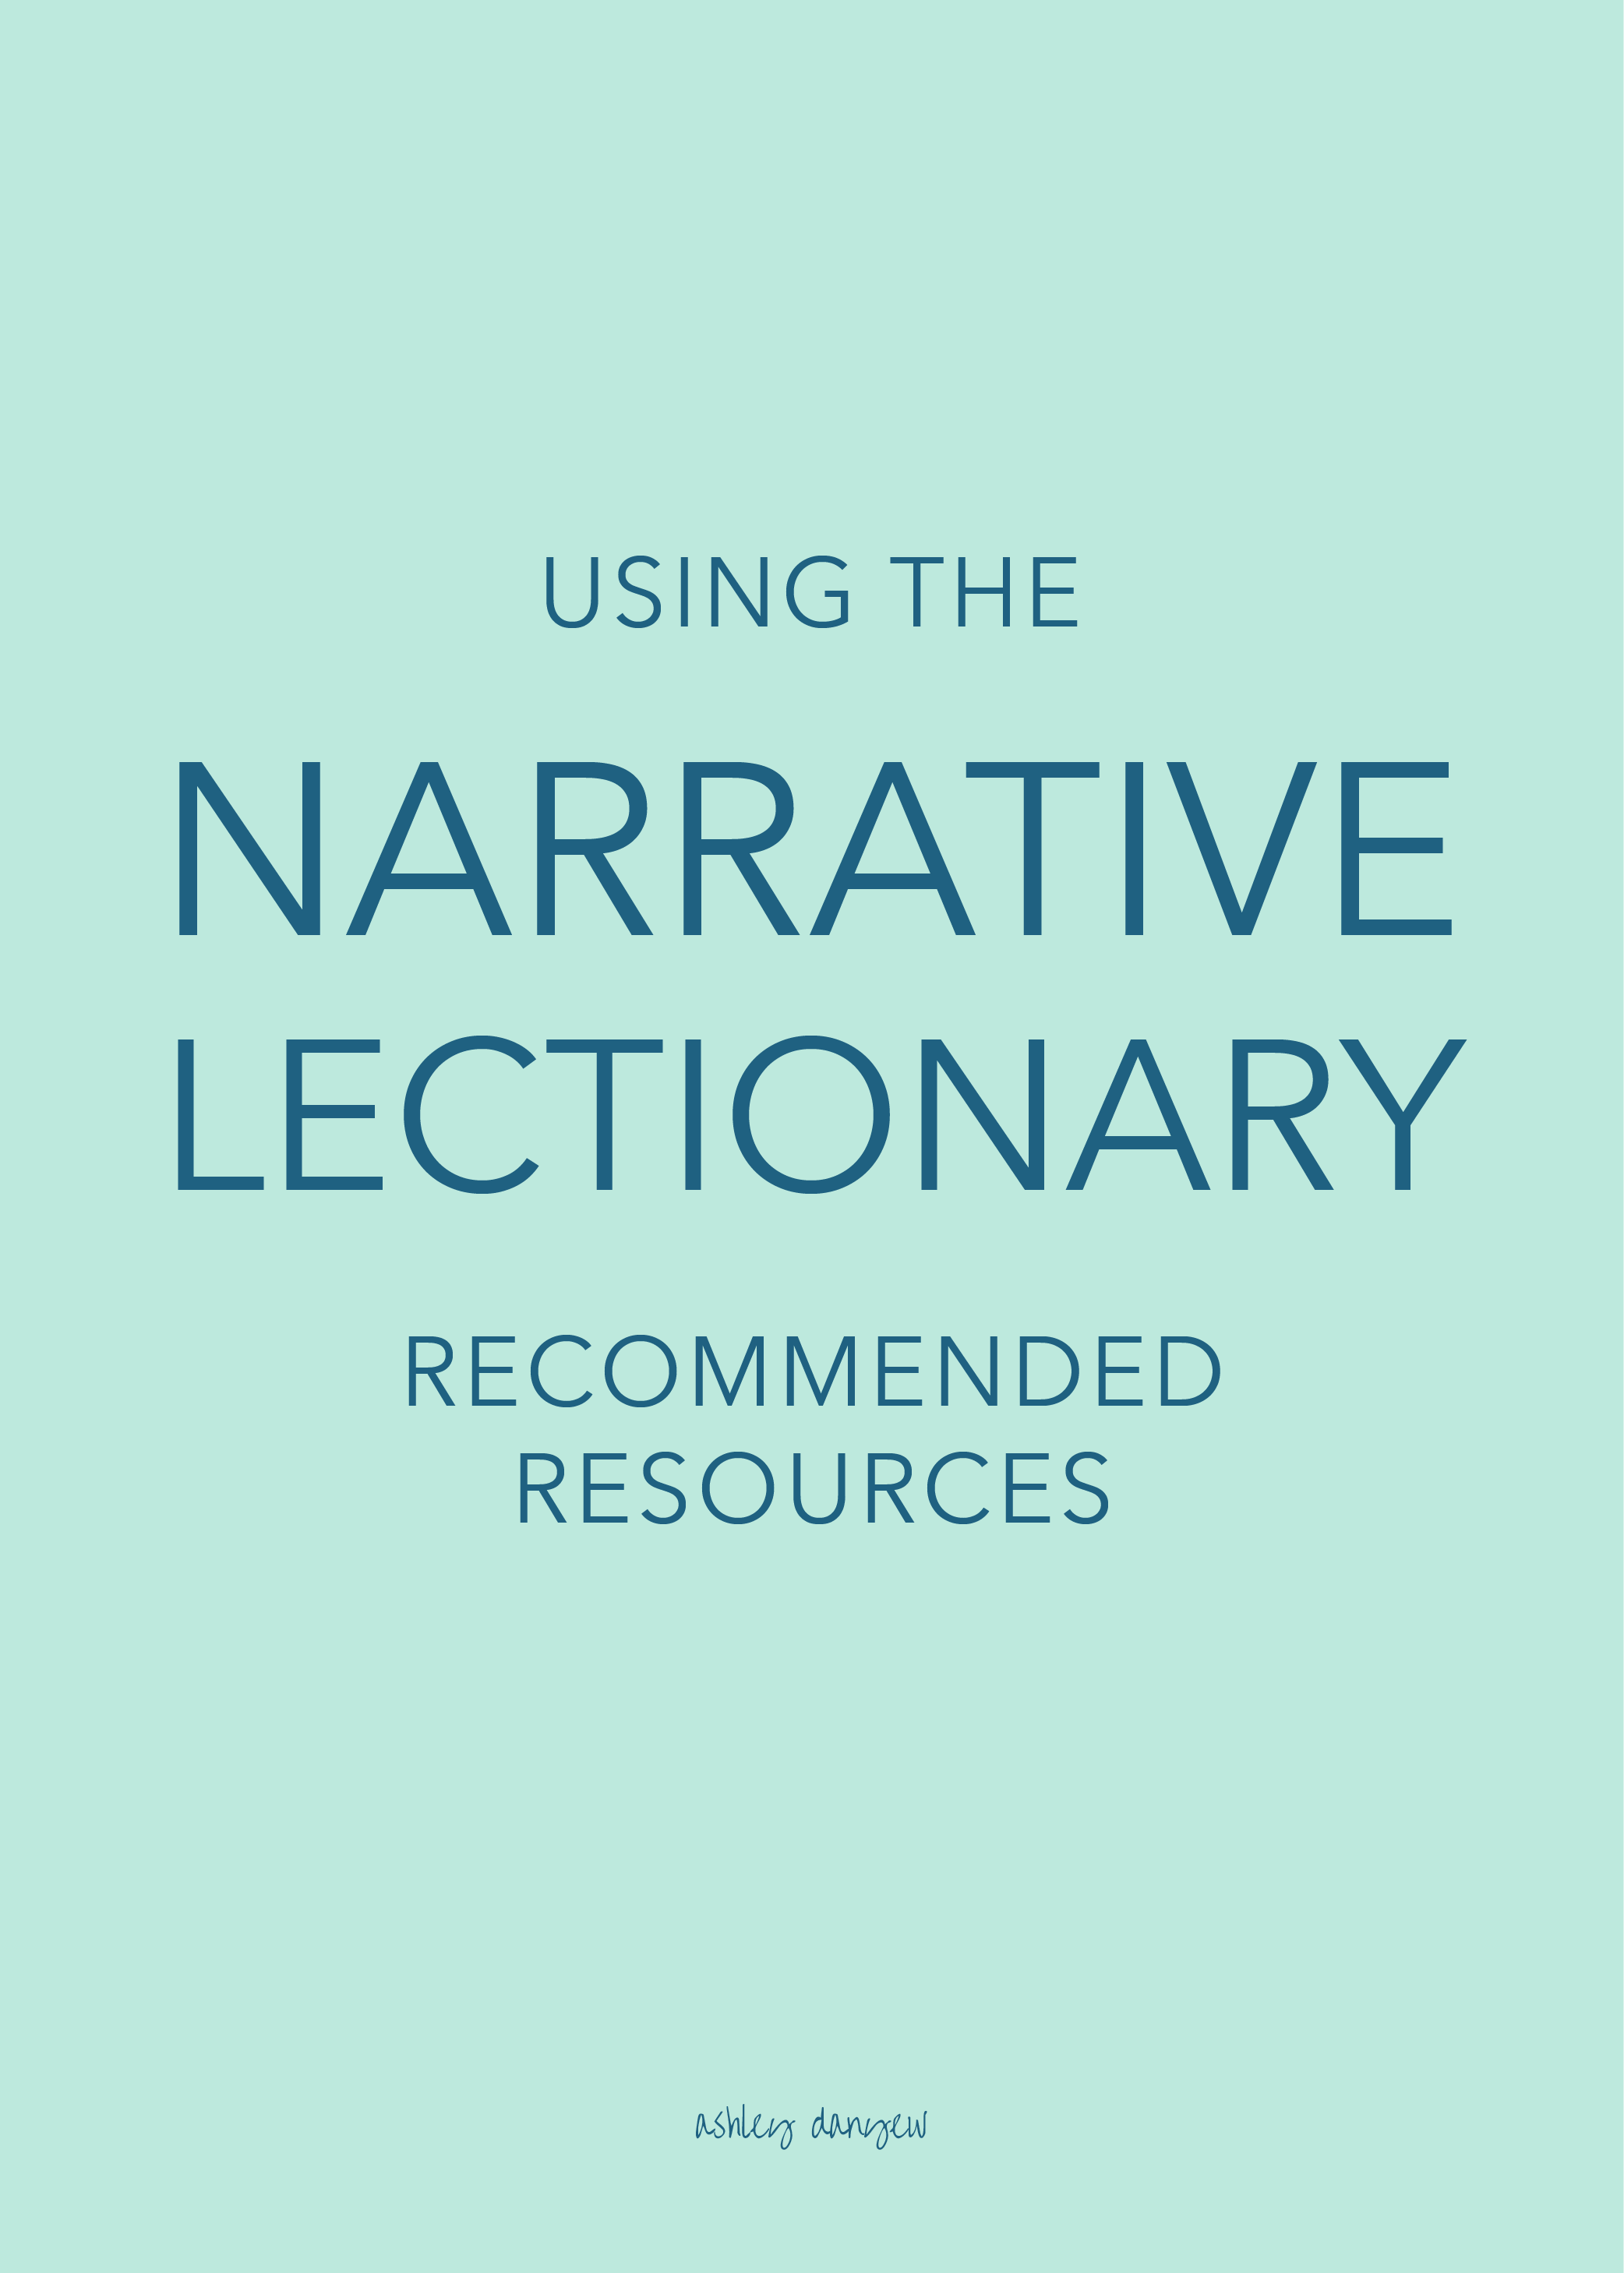 Using the Narrative Lectionary: Recommended Resources